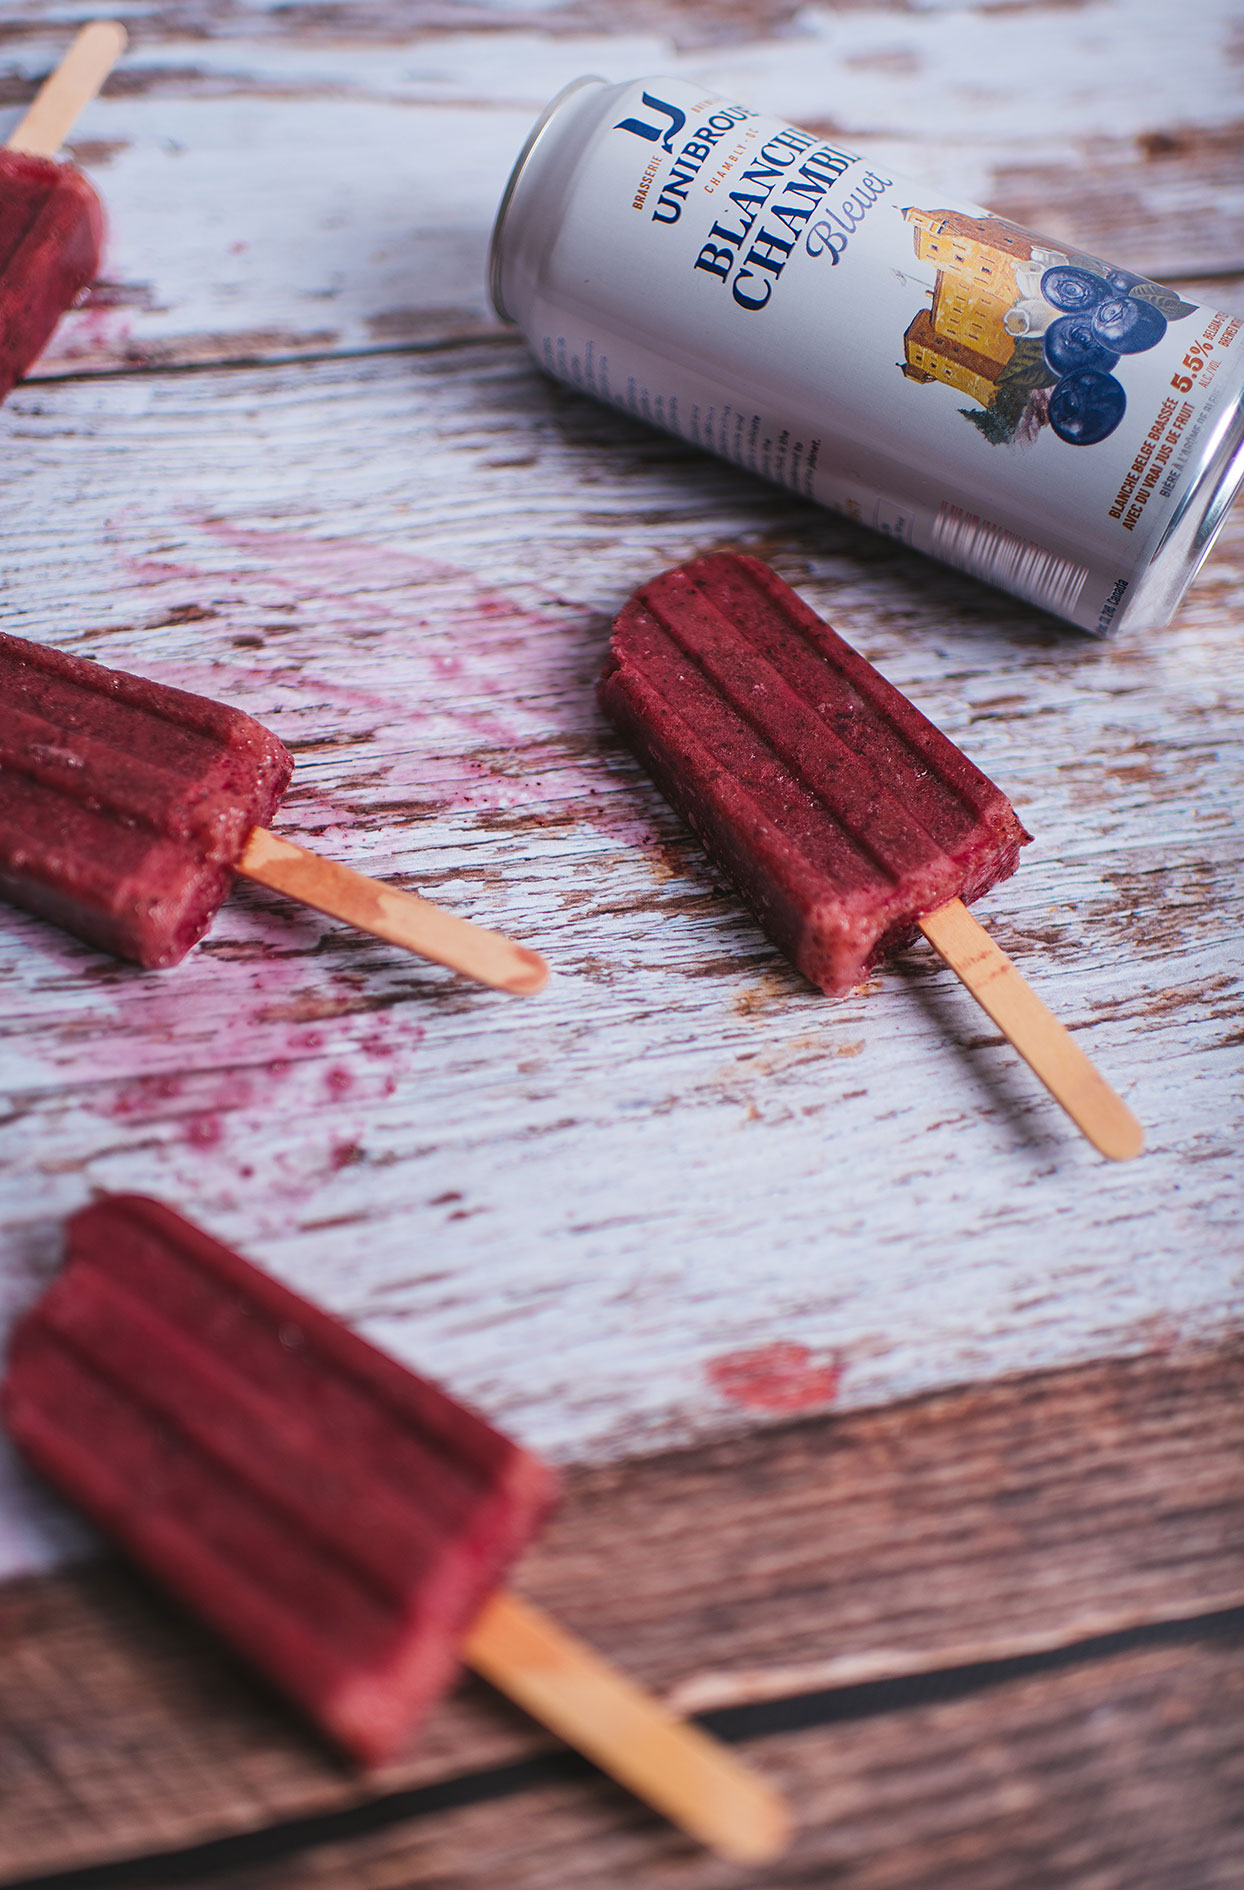 Blueberry beer popsicles